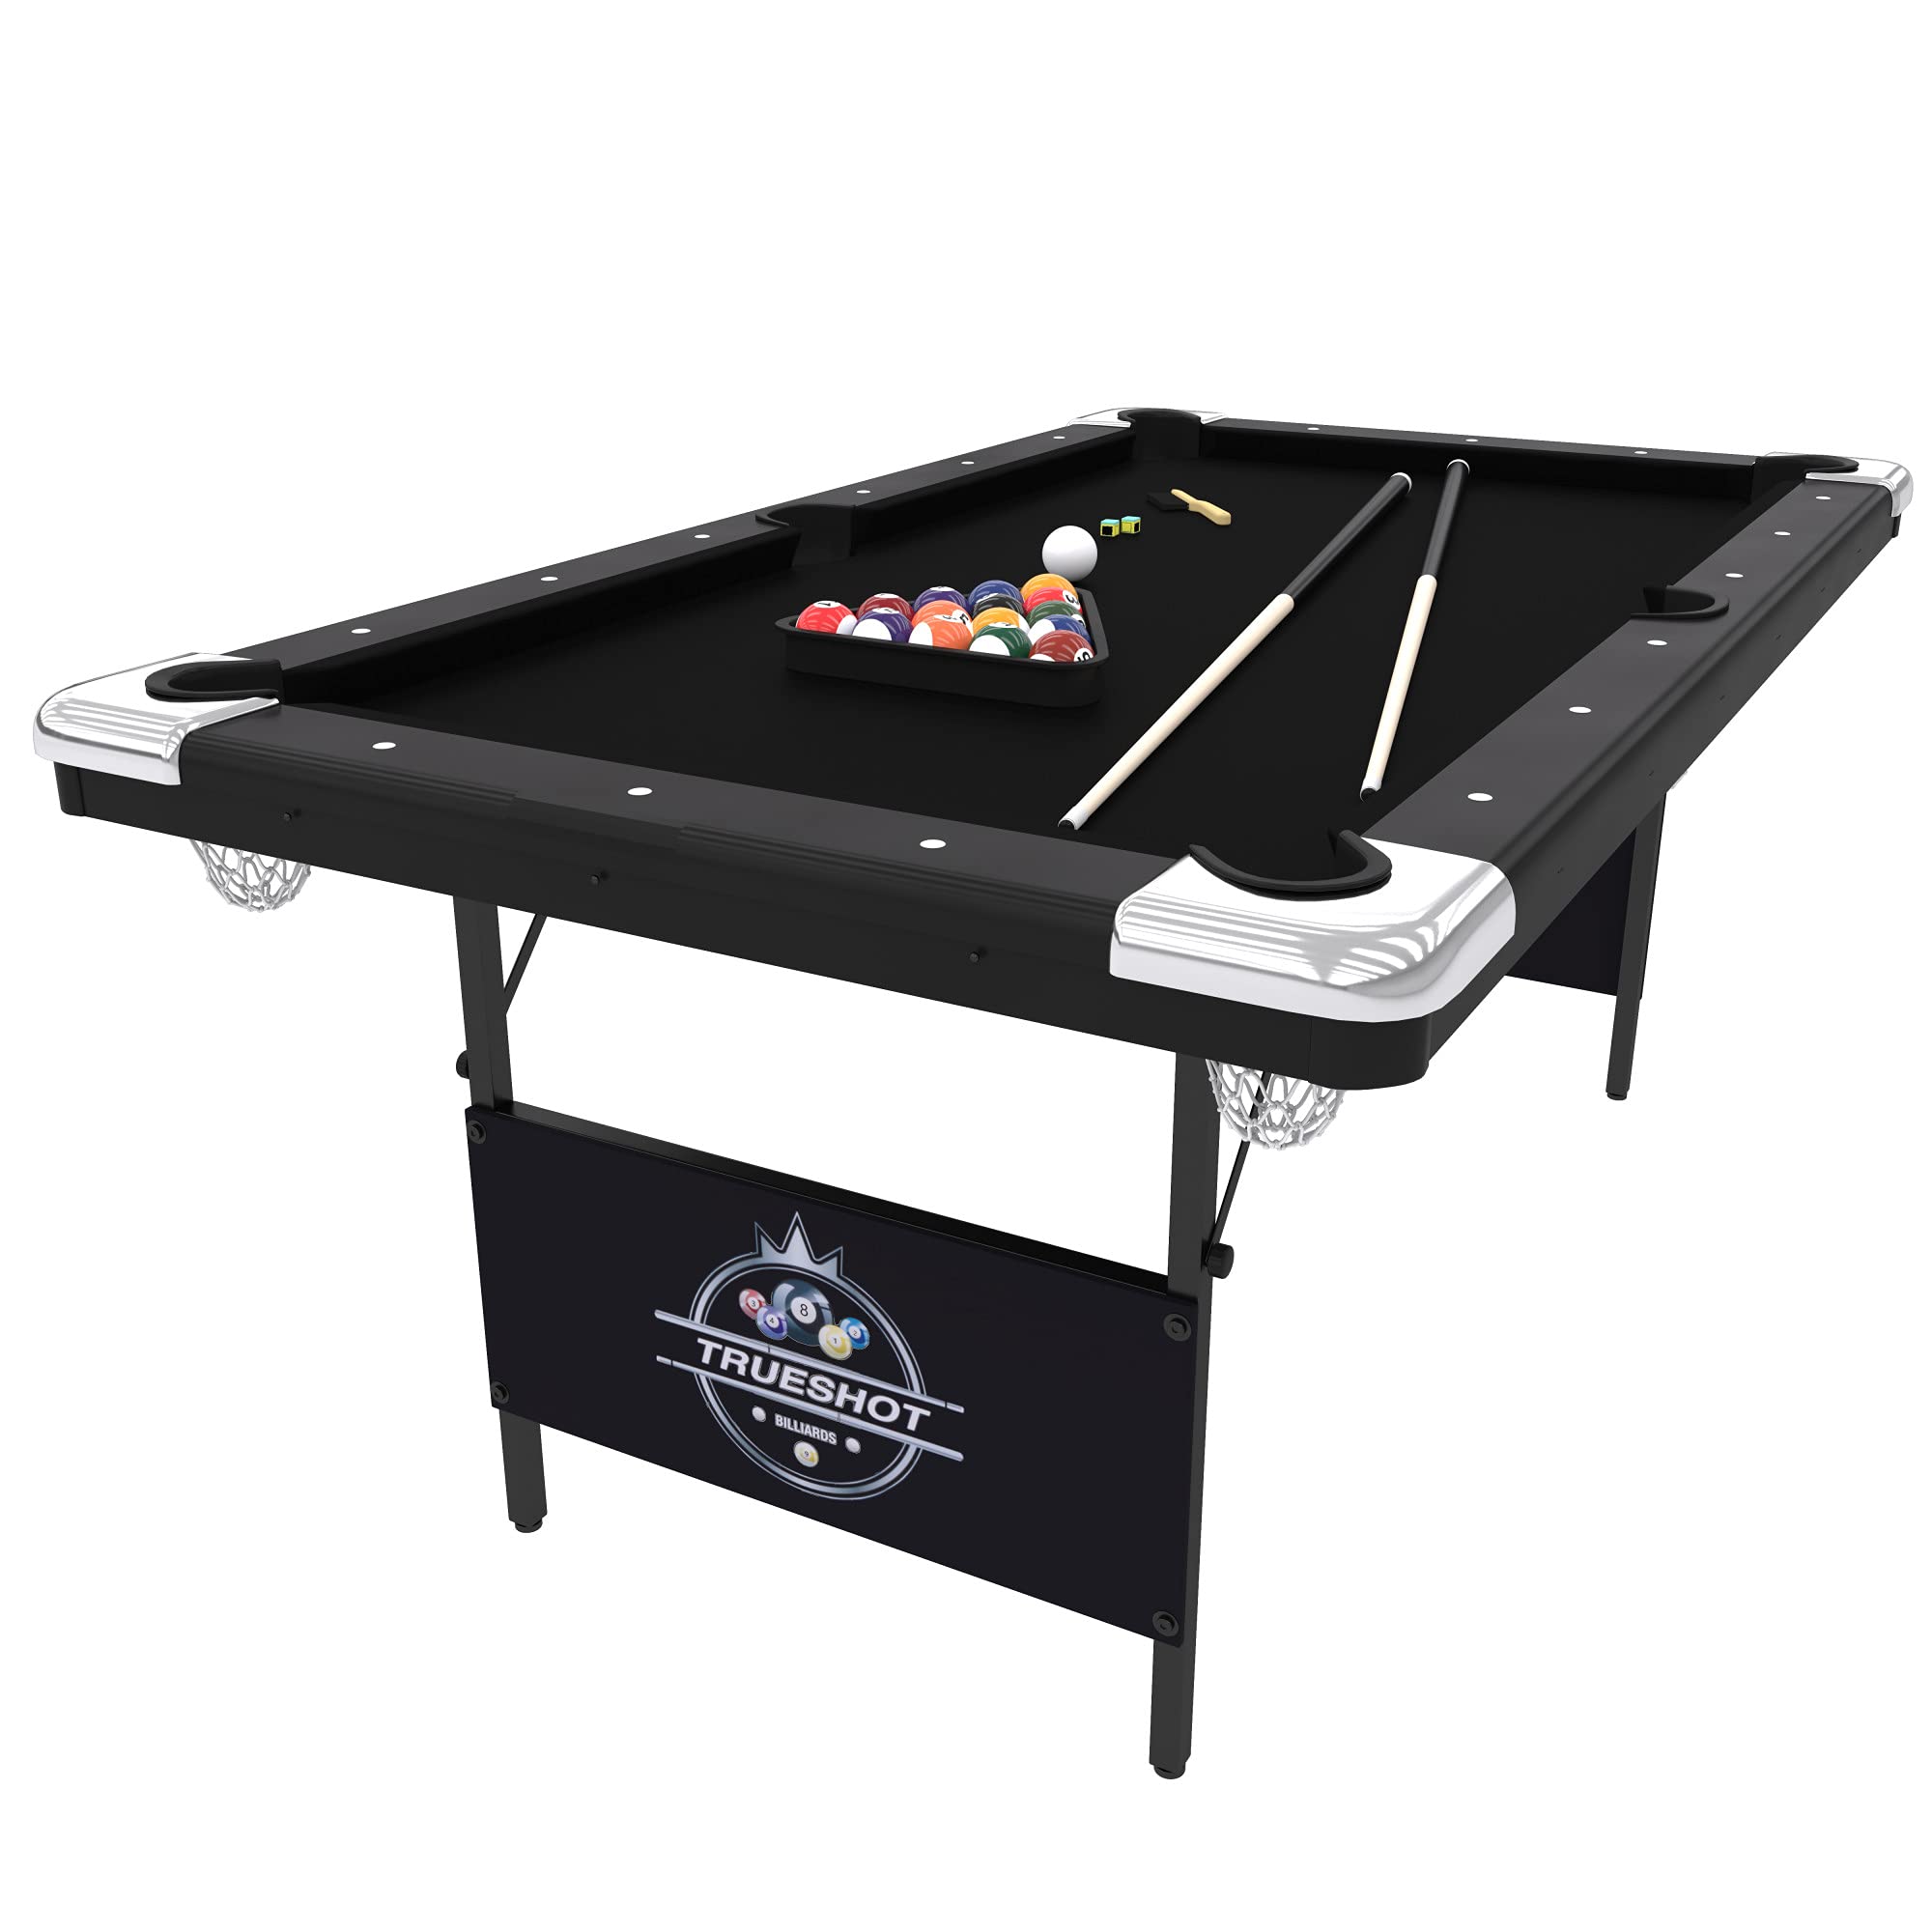 Fat Cat by GLD PRODUCTS Trueshot 6 Ft. Pool Table | Folding Legs for Storage | 64-6035 model